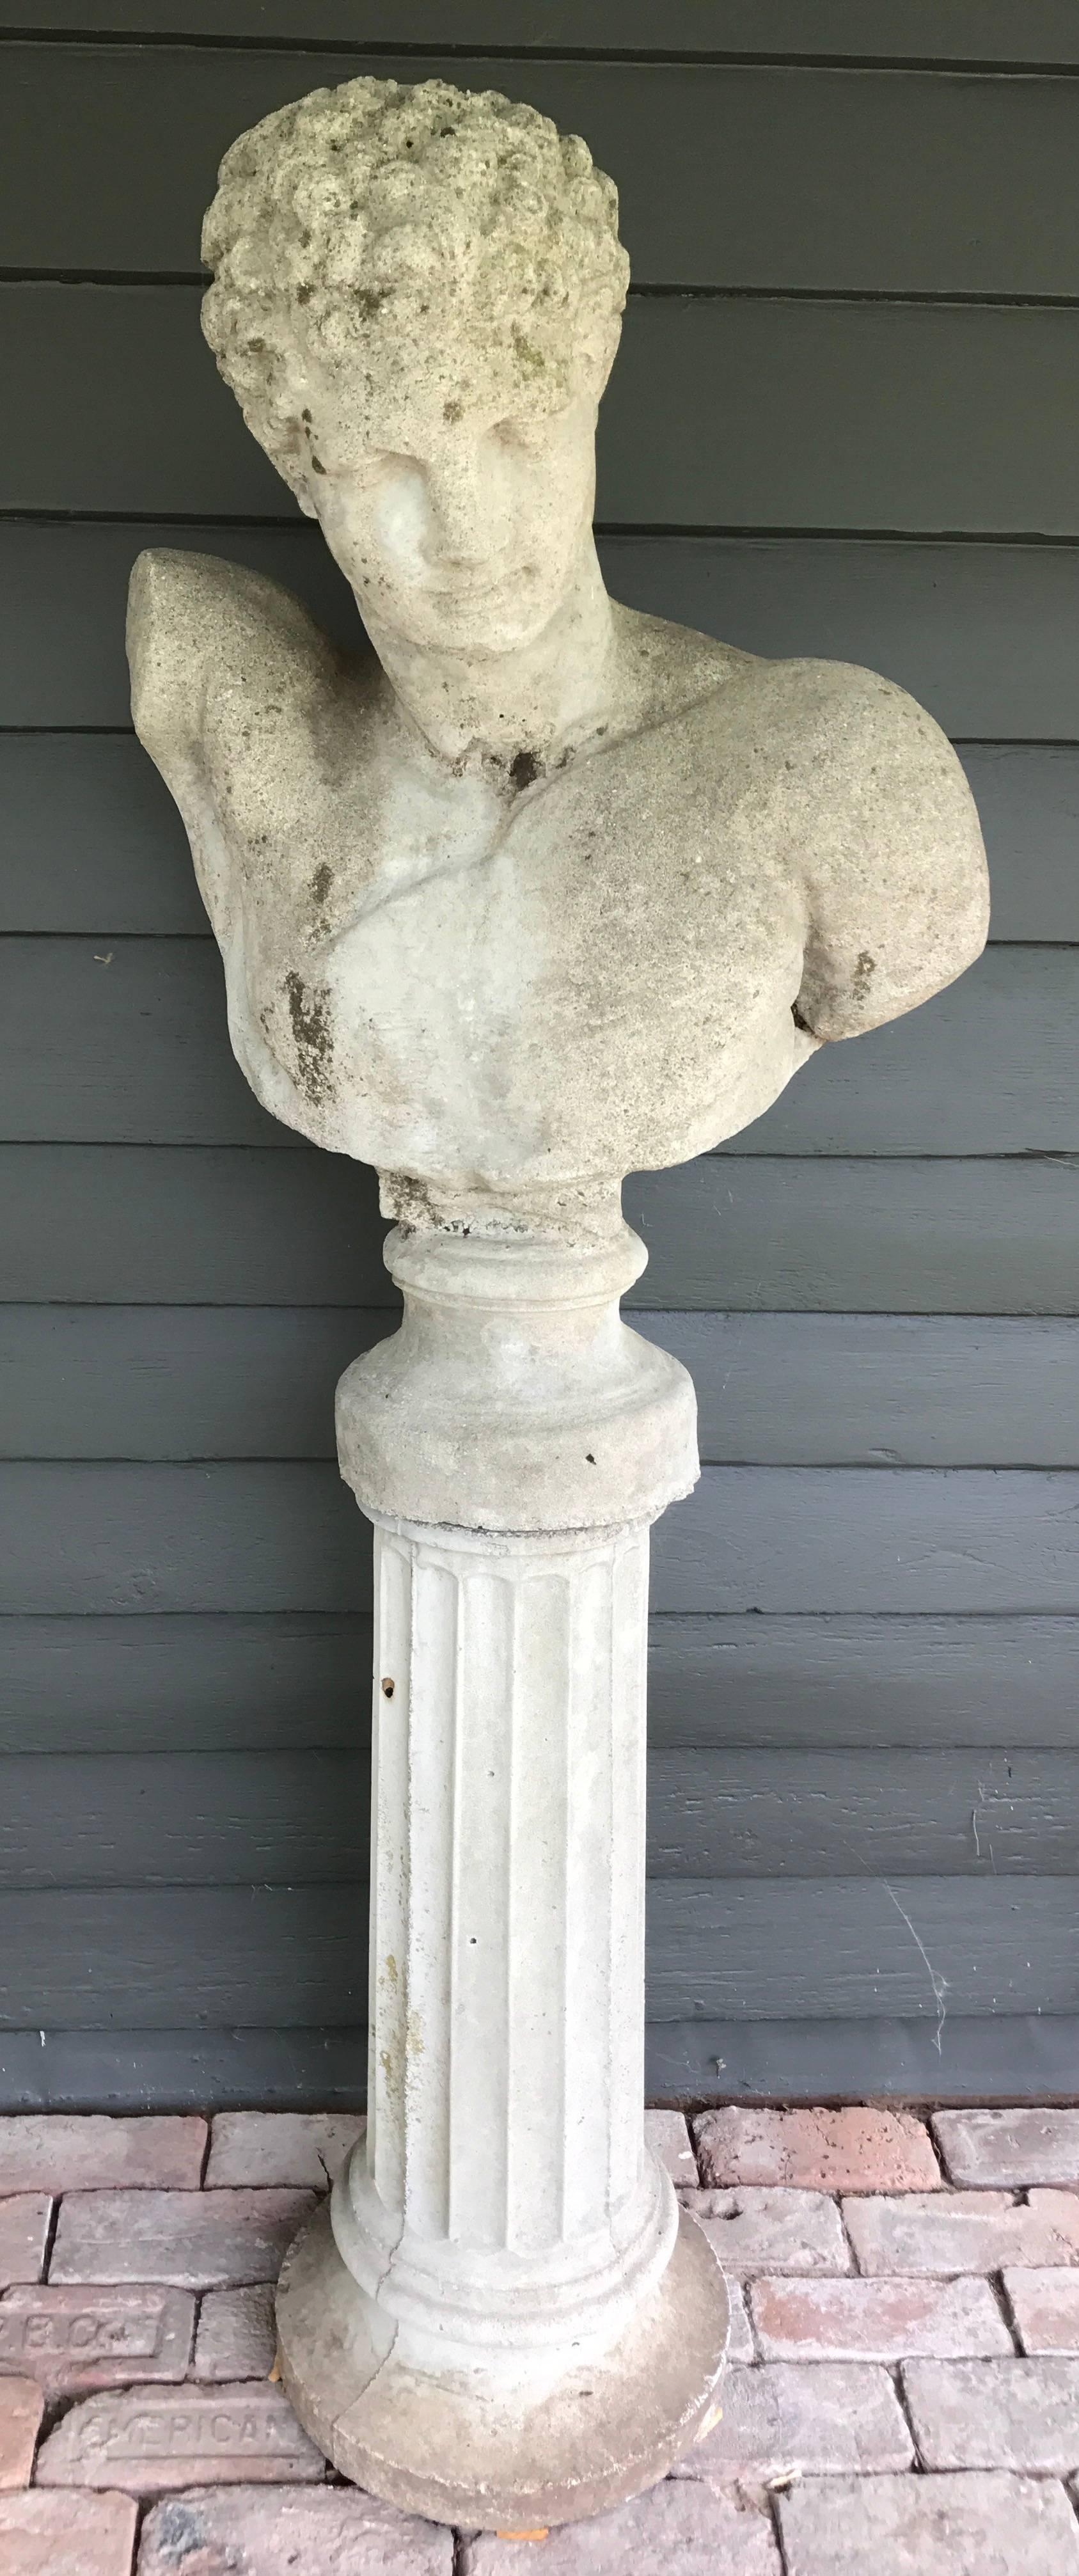 Cast stone Italian classical style garden bust of Hermes with associated column base. Two available.